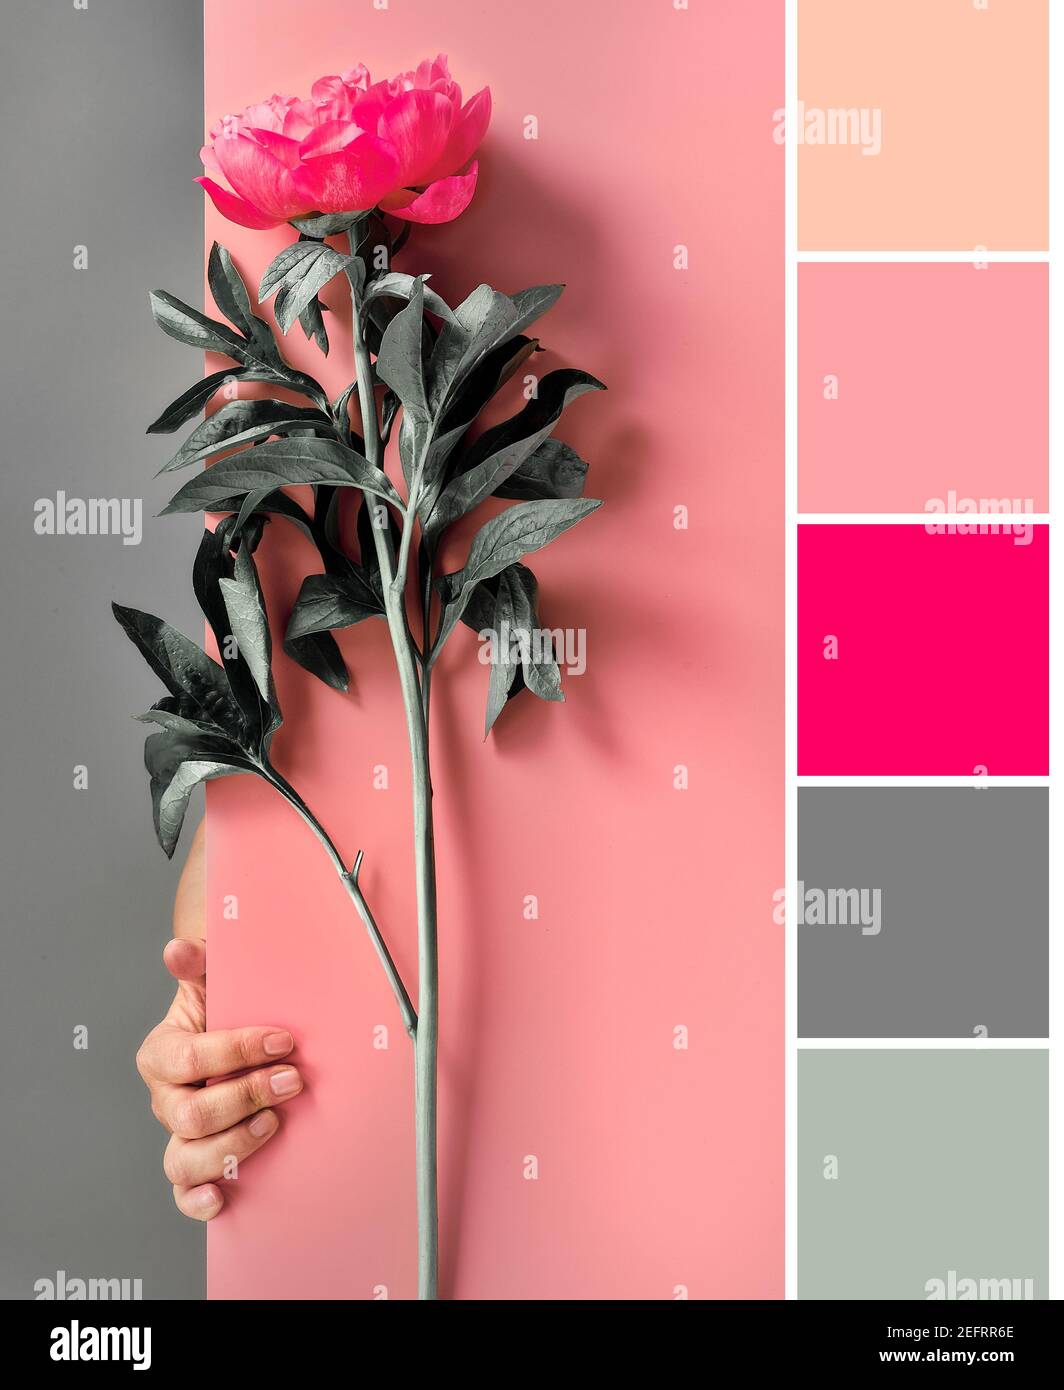 Color matching palette from image of pink peony flower from behind paper board. Trendy casual greeting background in split two tone pink and red. Stock Photo